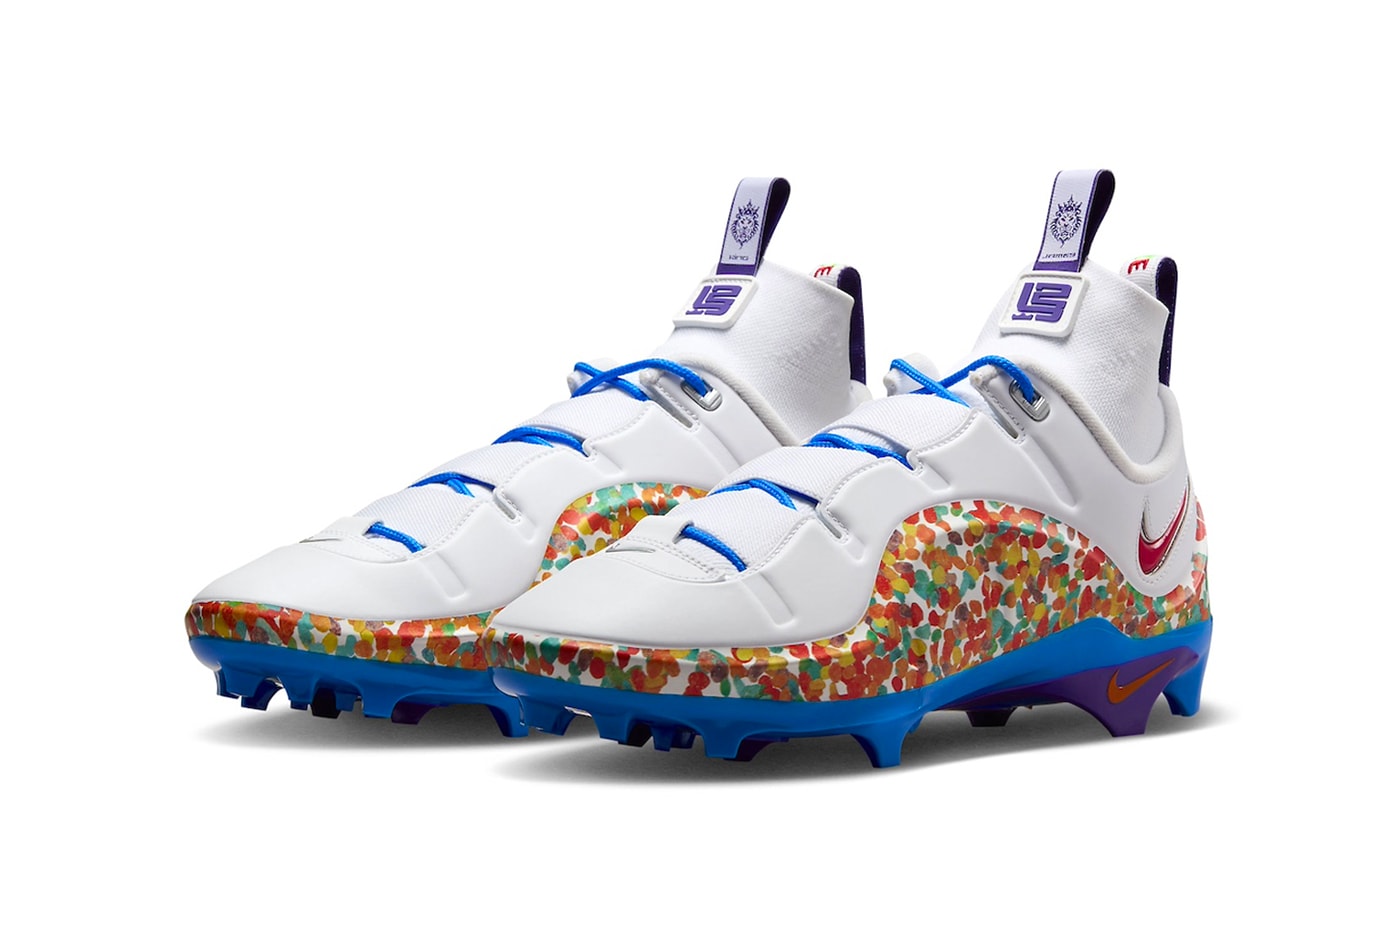 Official Look at the Nike LeBron 4 Menace "Fruity Pebbles" FV8044-100 spring 2024 soccer cleats football White/True Red-Volt-Radioactive-Varsity Purple-White cereal